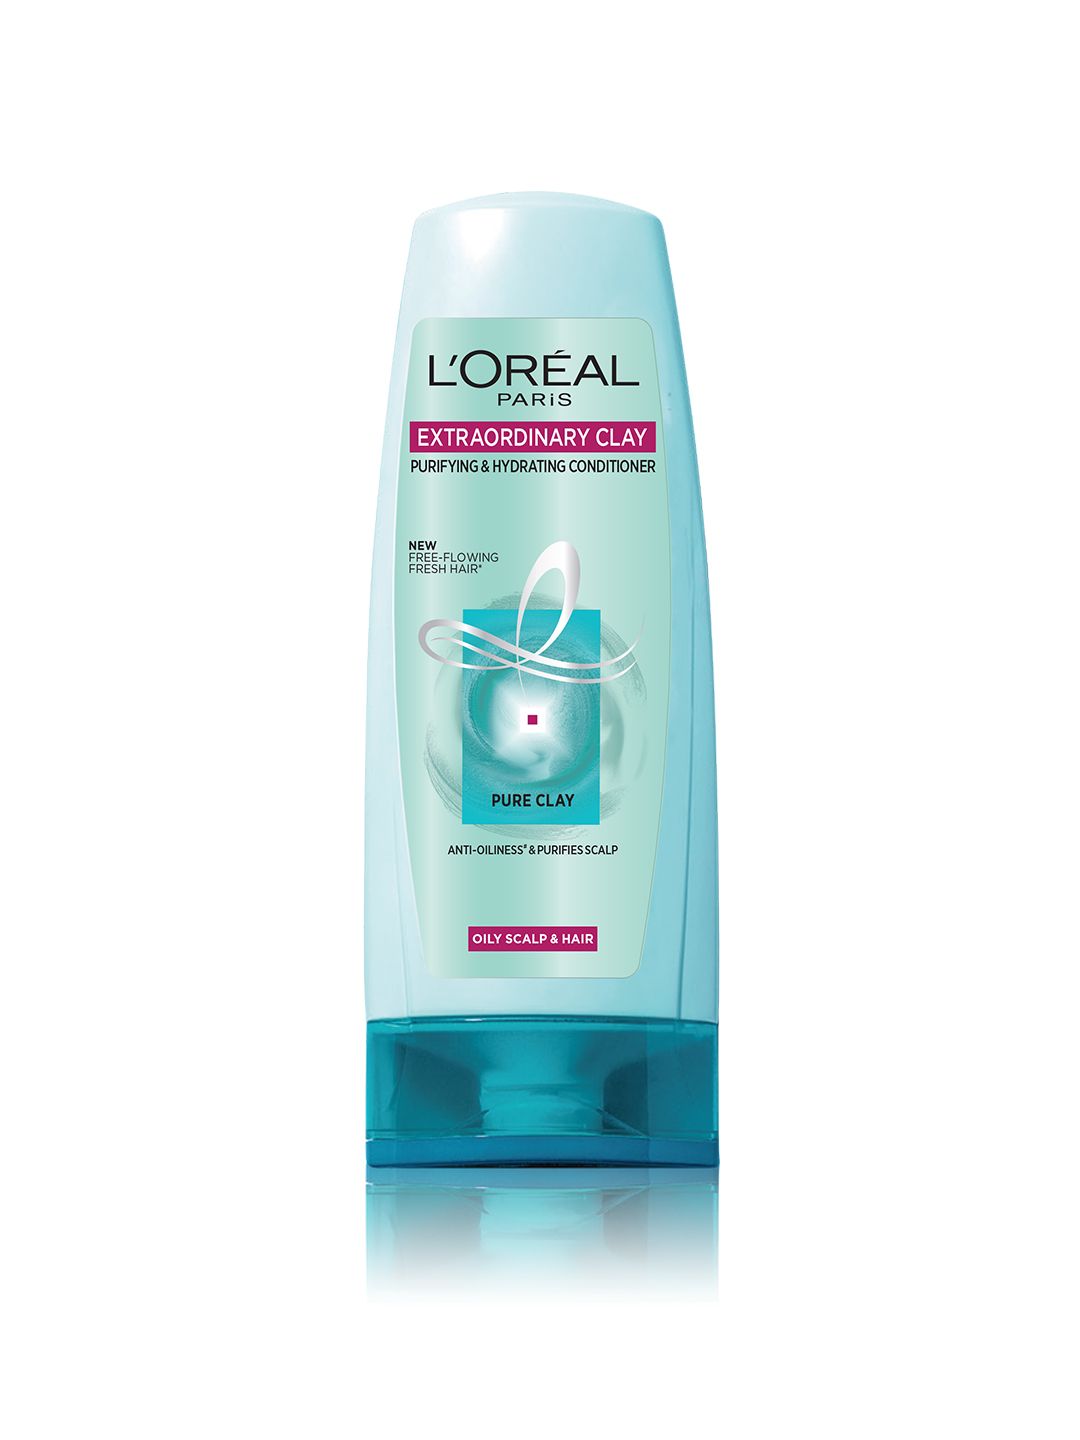 LOreal Paris Unisex Extraordinary Clay Purifying & Hydrating Conditioner 175 ml Price in India